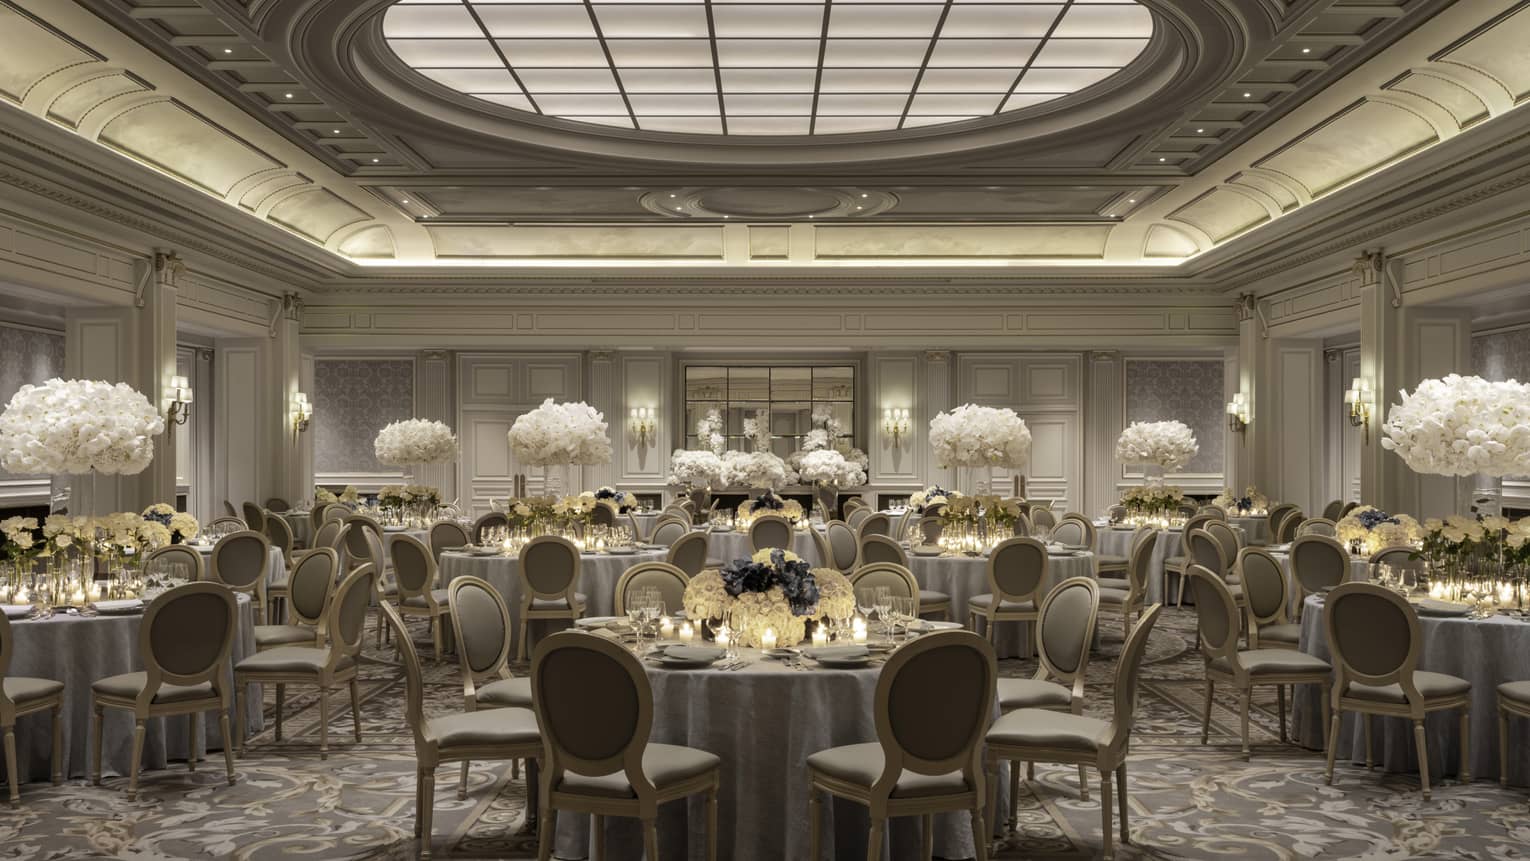 Elegant Paris banquet room, dining tables with white floral centrepieces under decorative domed ceiling